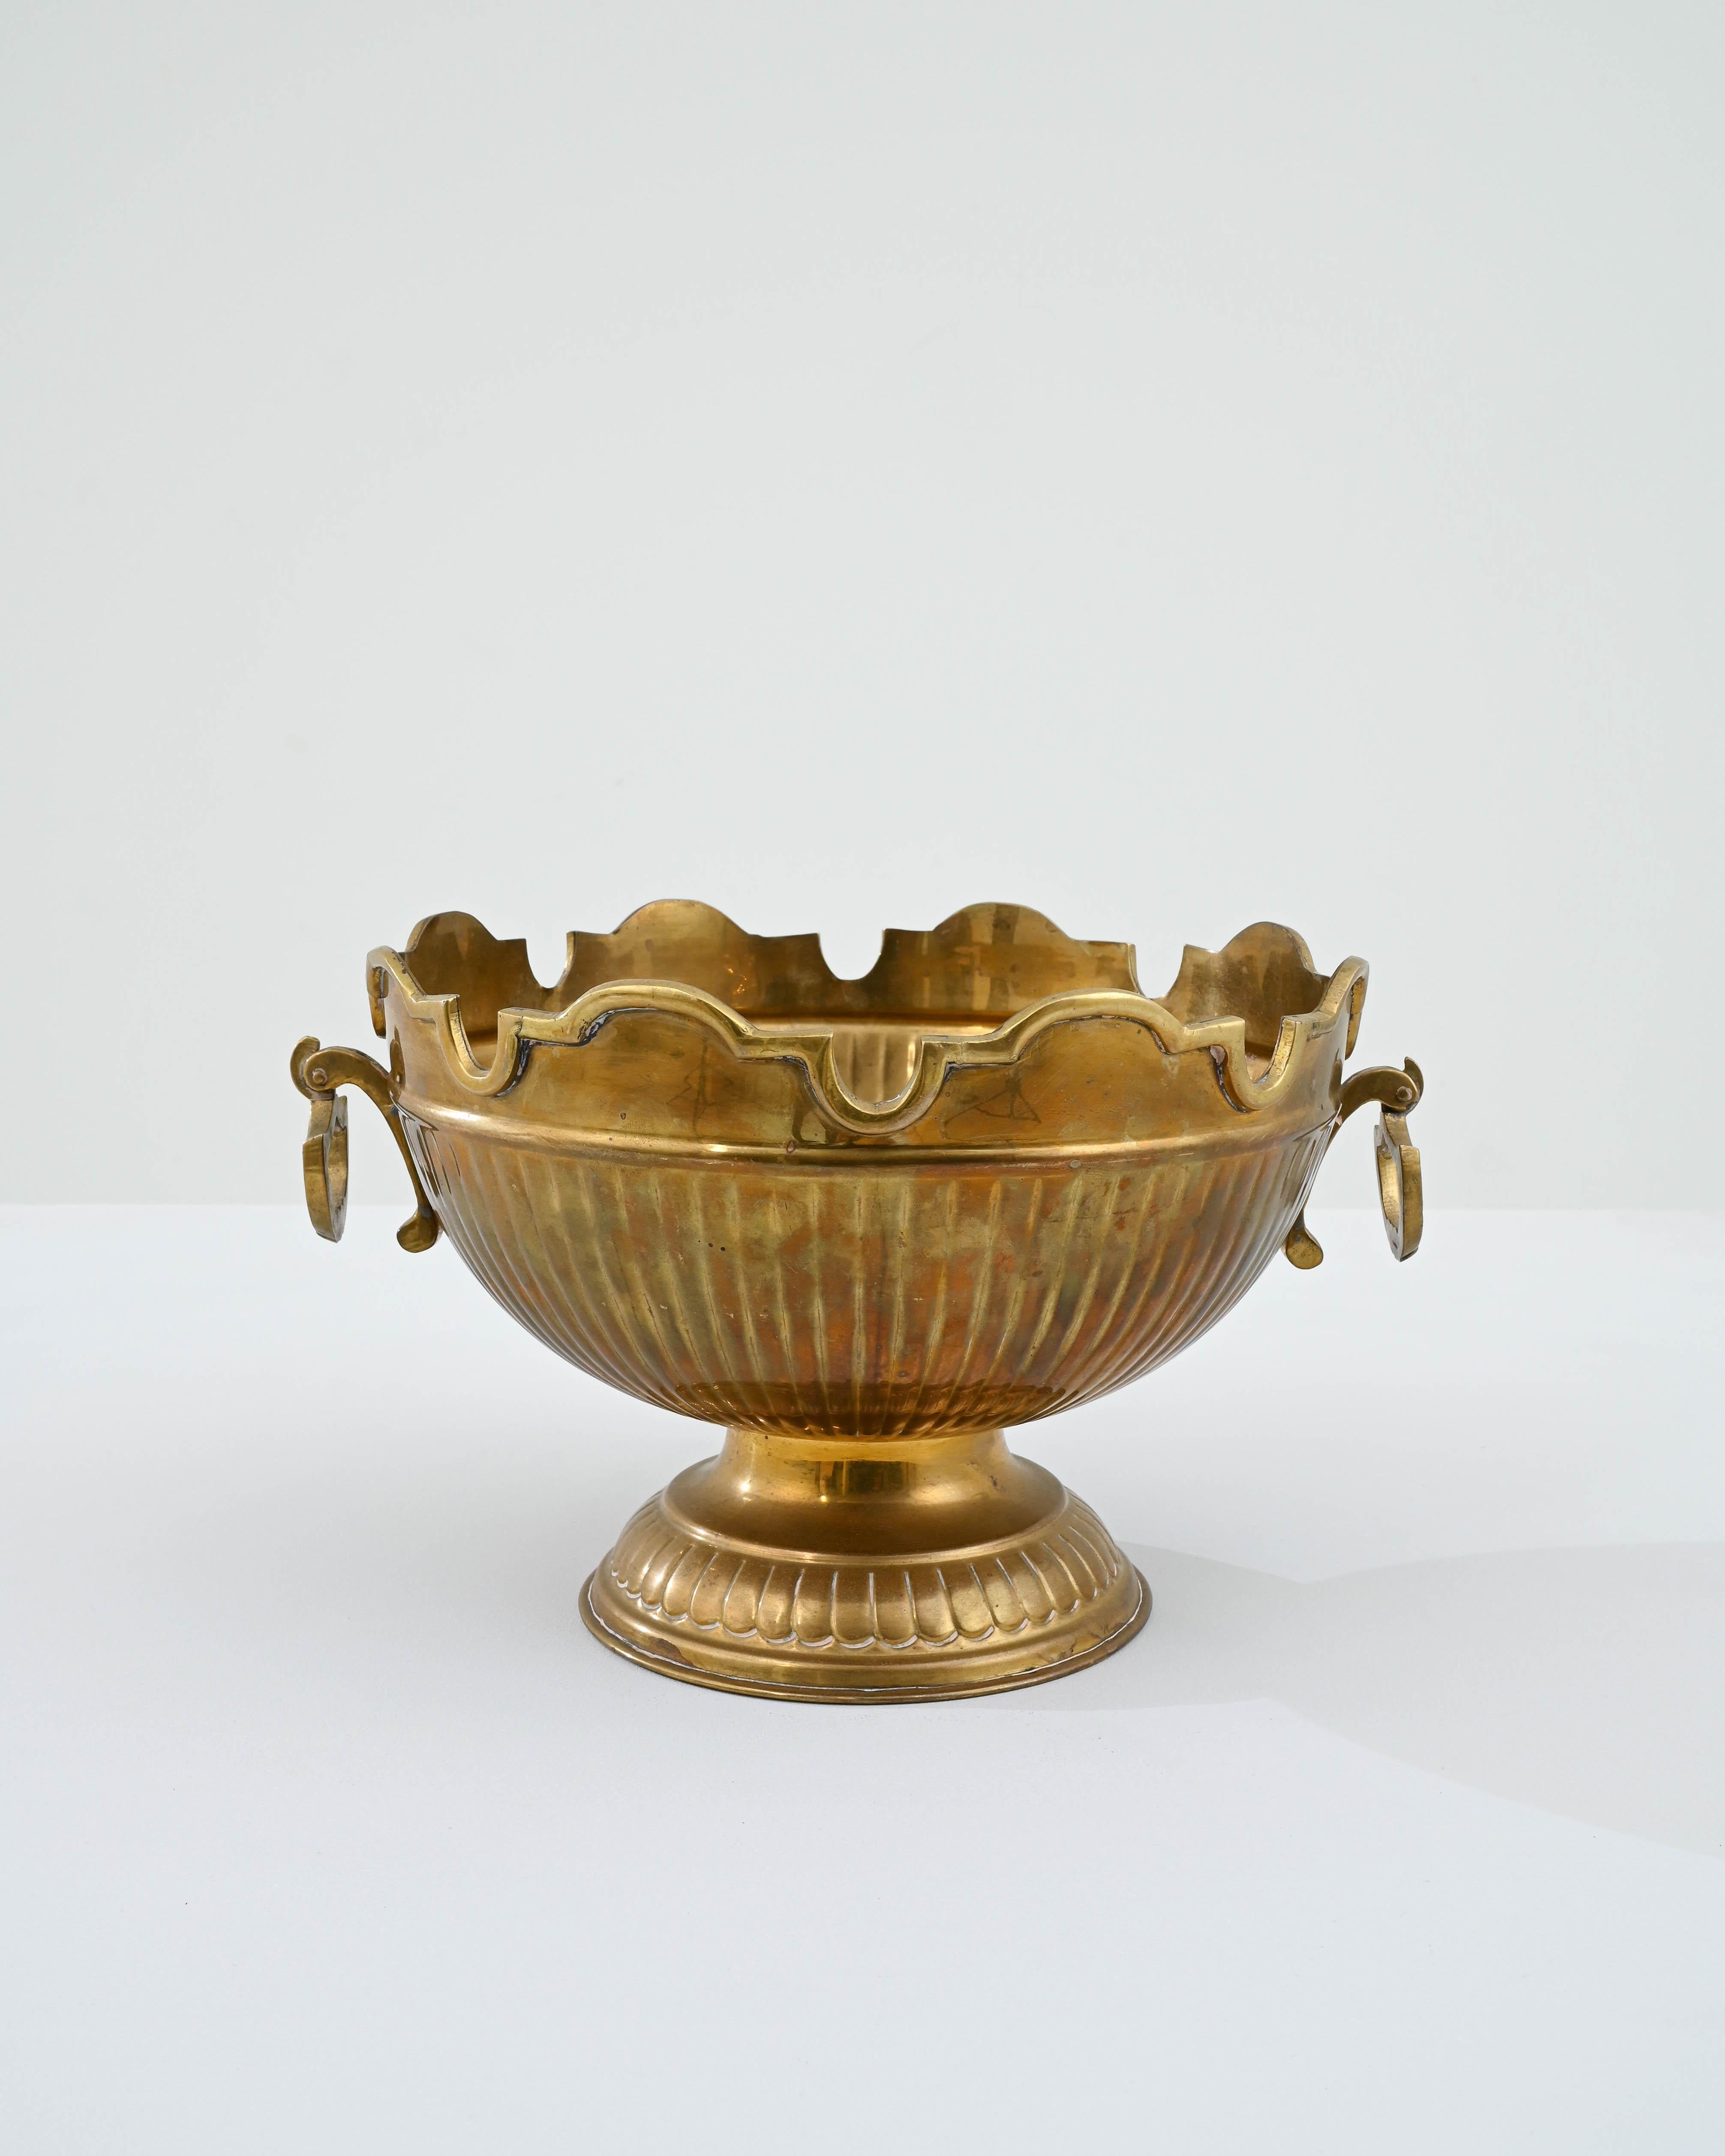 A brass bowl from early 20th Century France. A broad cup shape elevated on a low pedestal, the exterior surface has developed a captivating finish, muted golden brass has gently worn through an organic process of oxidation and polishing. Smoothed